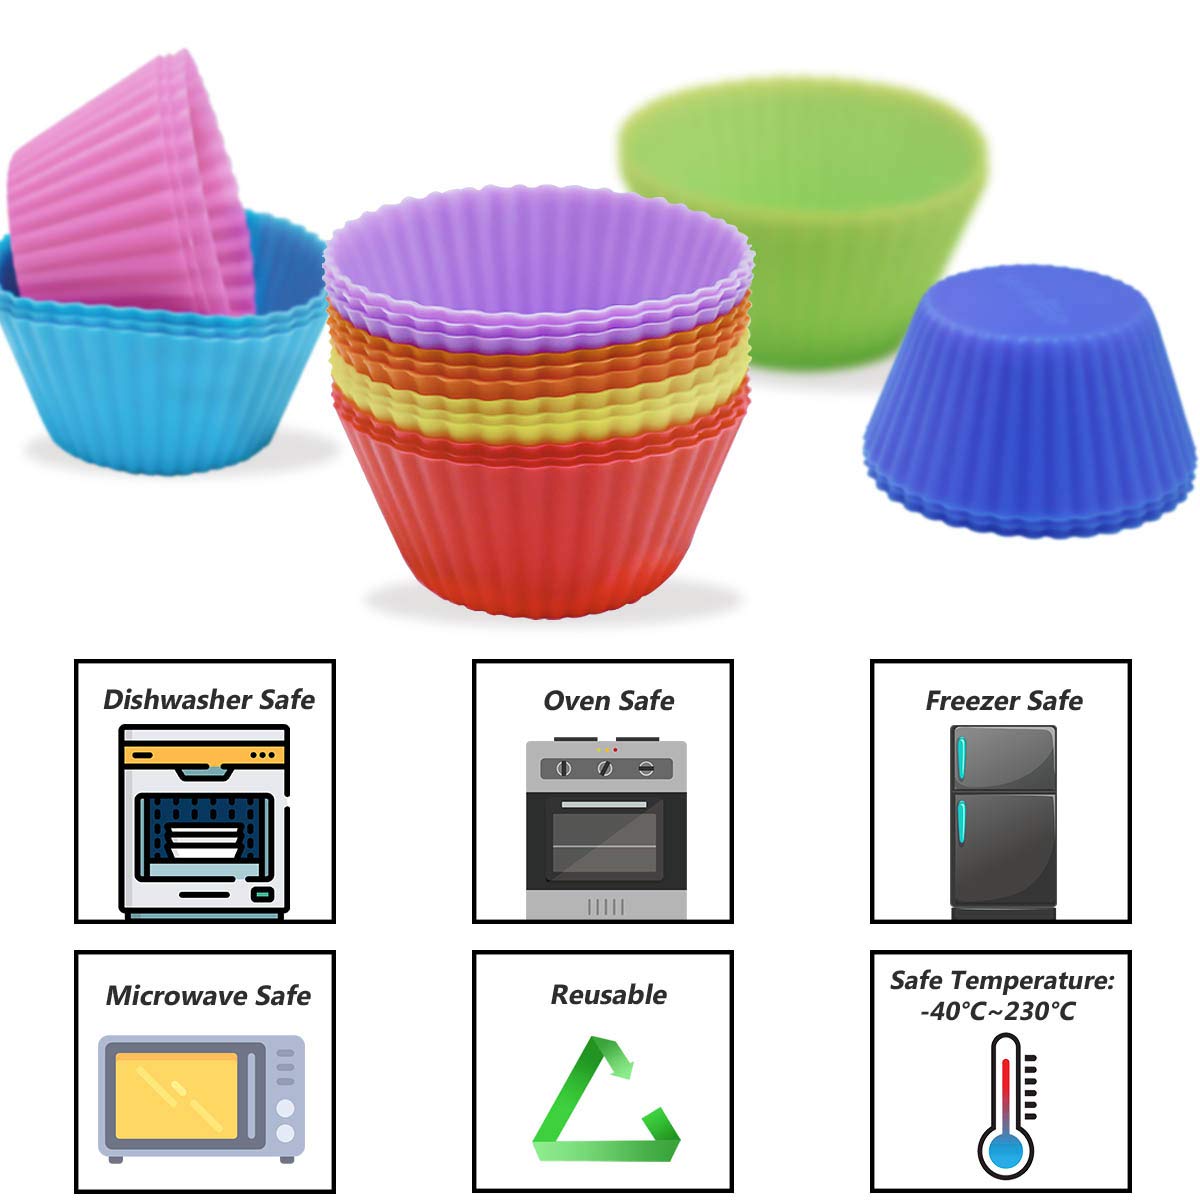 24 Pack Silicone Baking Cups Reusable Muffin Liners Non-Stick Cup Cake Molds Set Cupcake Silicone Liner Standard Size Silicone Cupcake Holder Reusable Cupcake Liners Christmas Gift (8 Rainbow Colors)